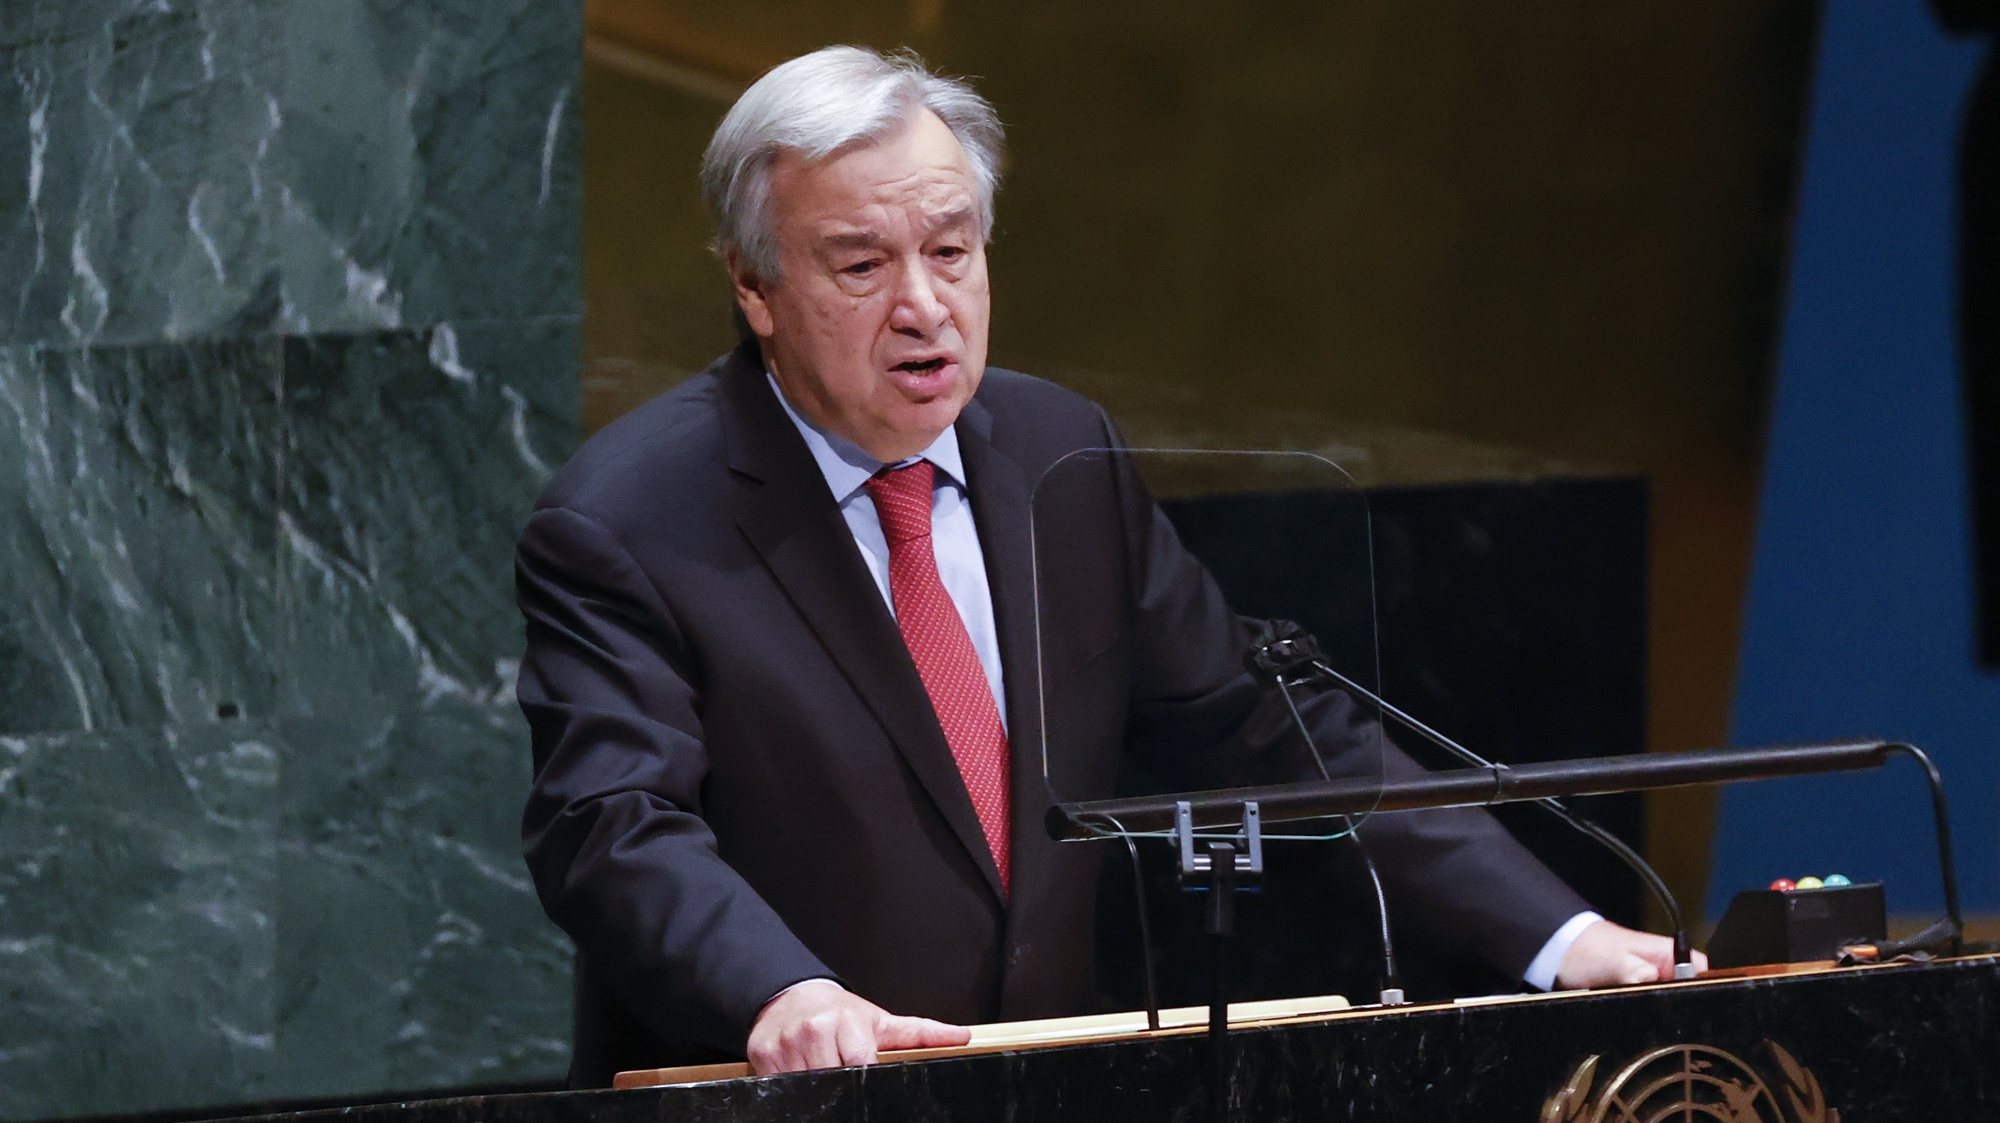 epa09215253 United Nations Secretary General Antonio Guterres addresses the United Nations General Assembly on the situation in the Middle East, including the Palestinian question, at United Nations Headquarters in New York, New York, USA, 20 May 2021.  EPA/JASON SZENES